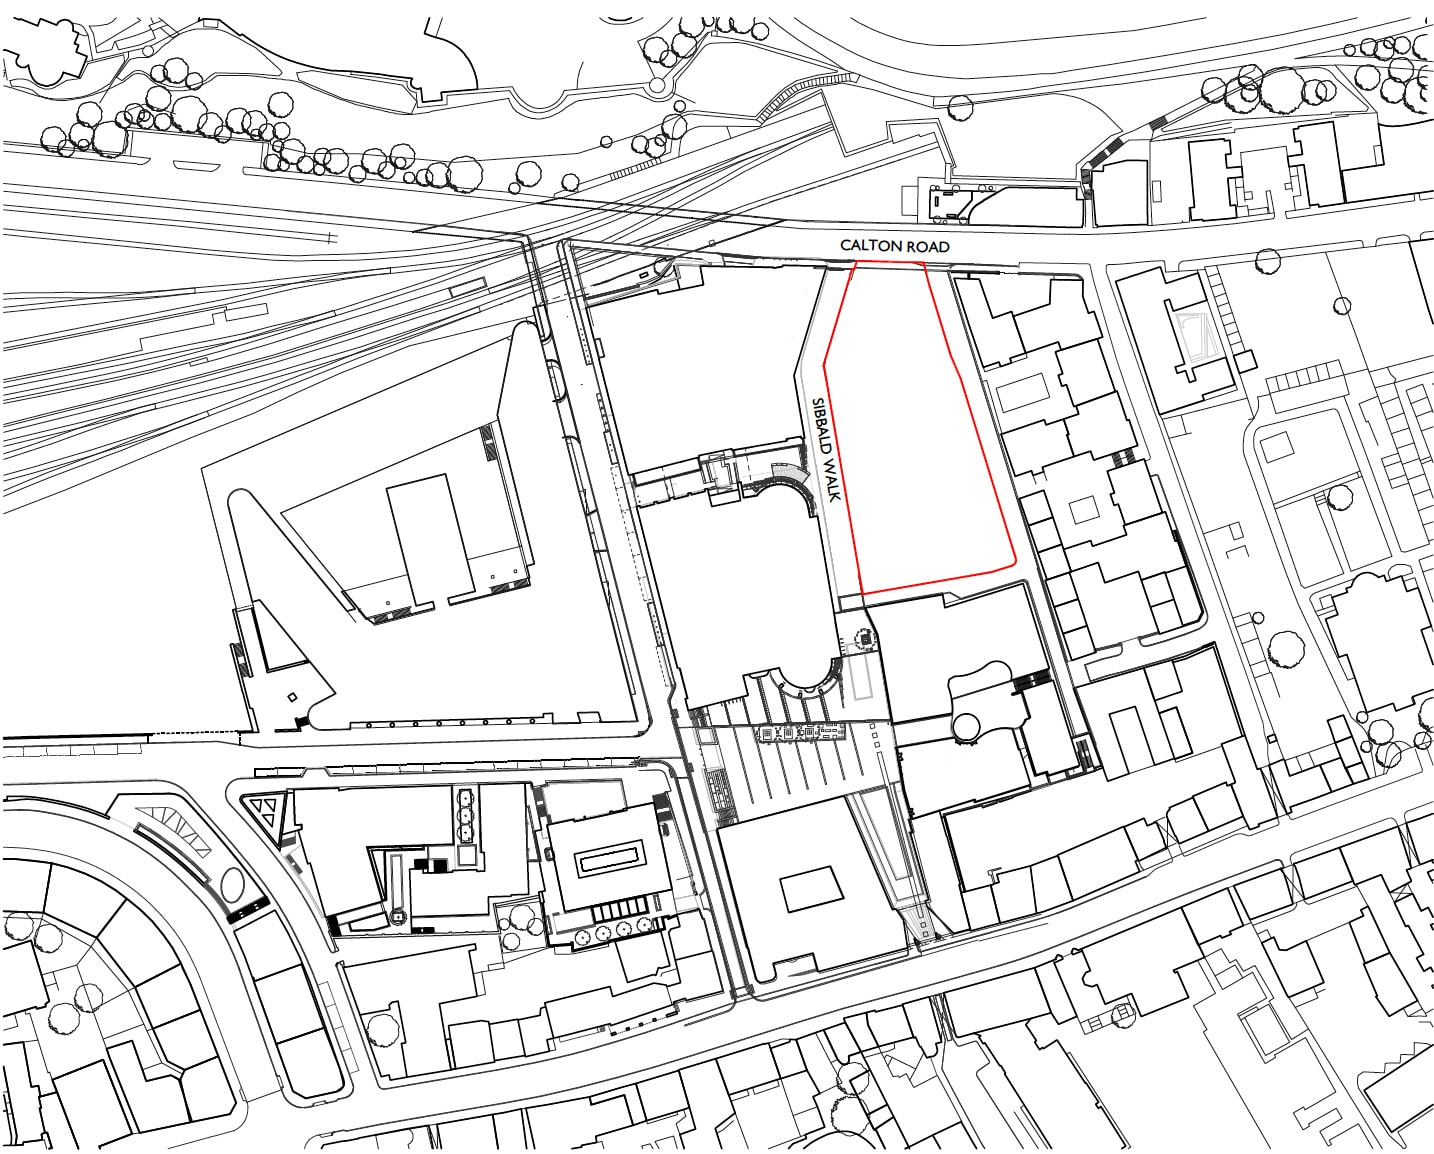 Social housing and student accommodation planned at New Waverley North